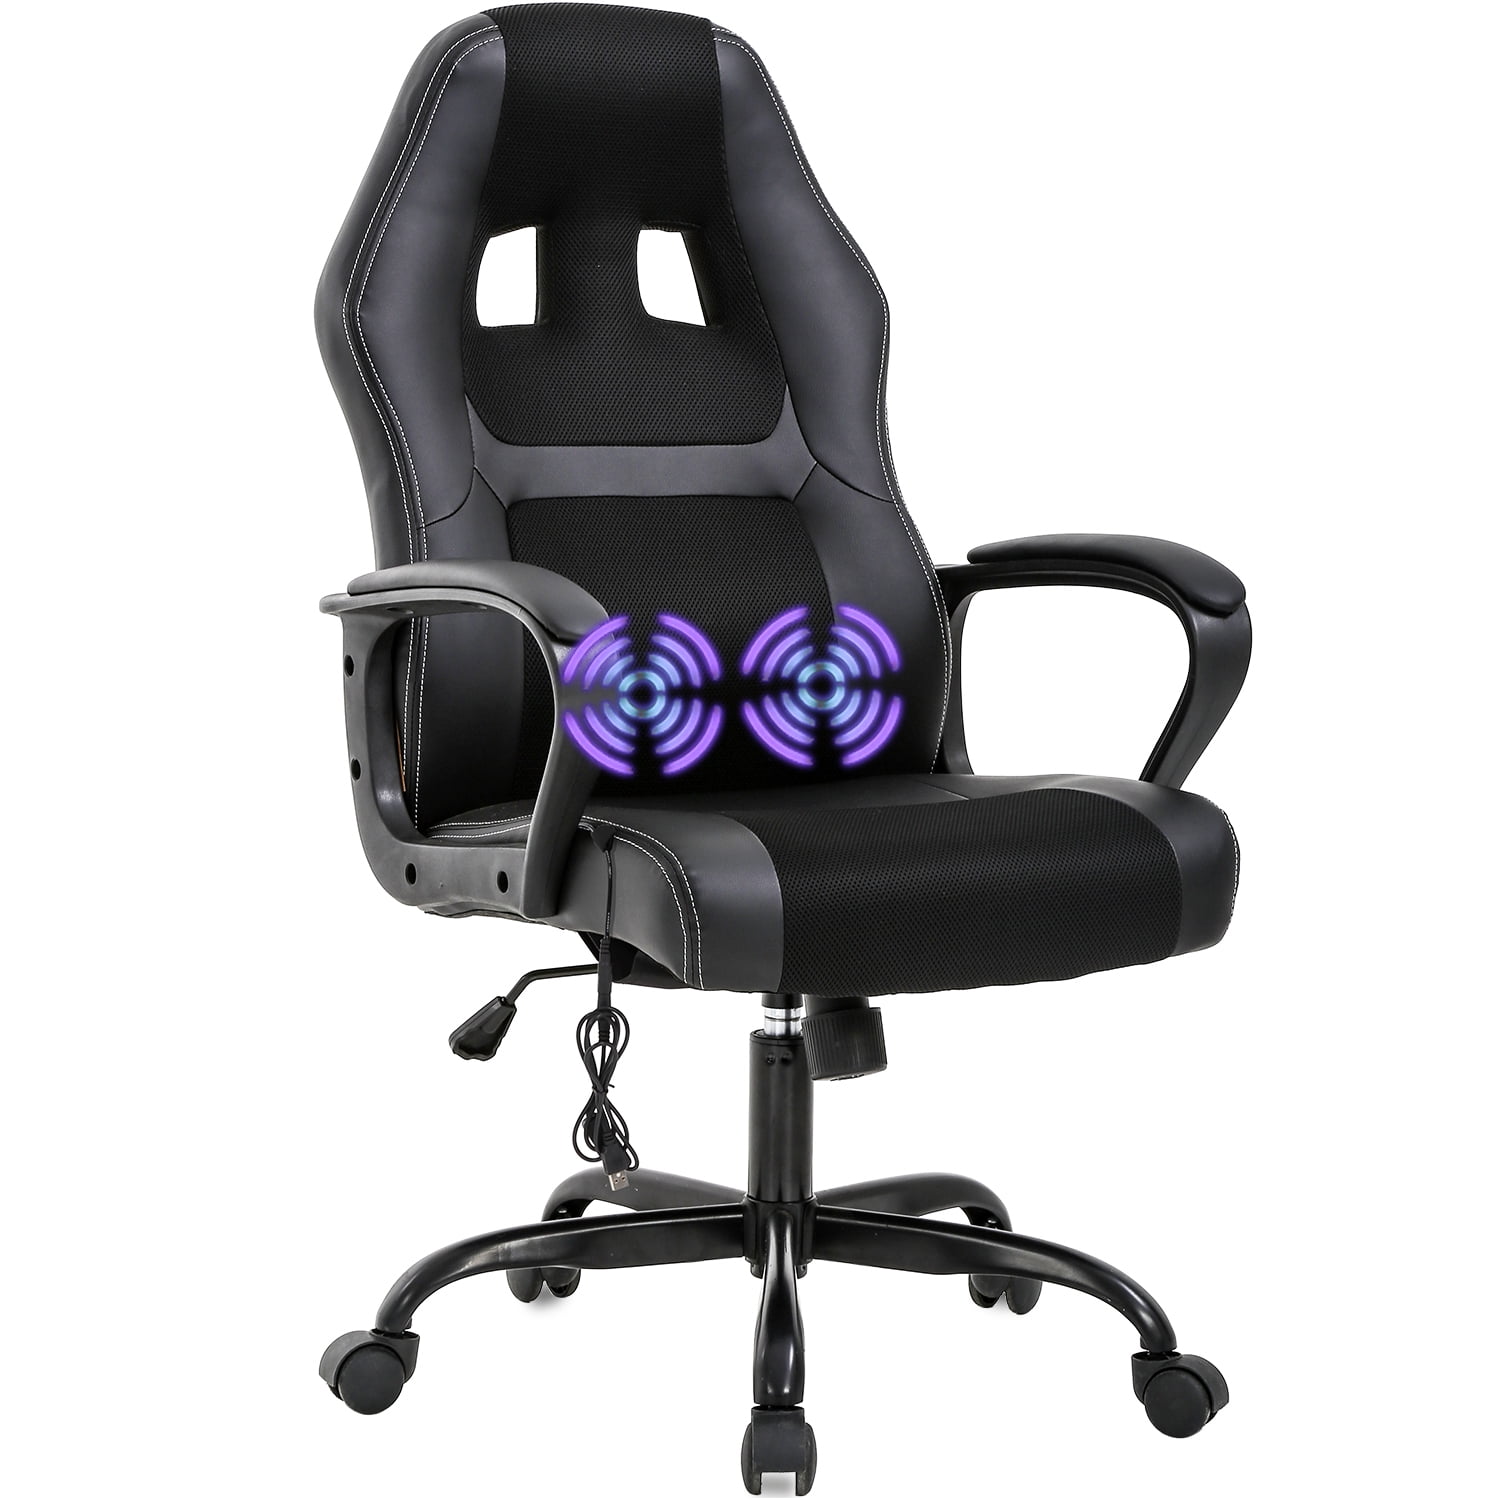 Gaming Chair Accessories: Best Supportive & Luxury Add-Ons